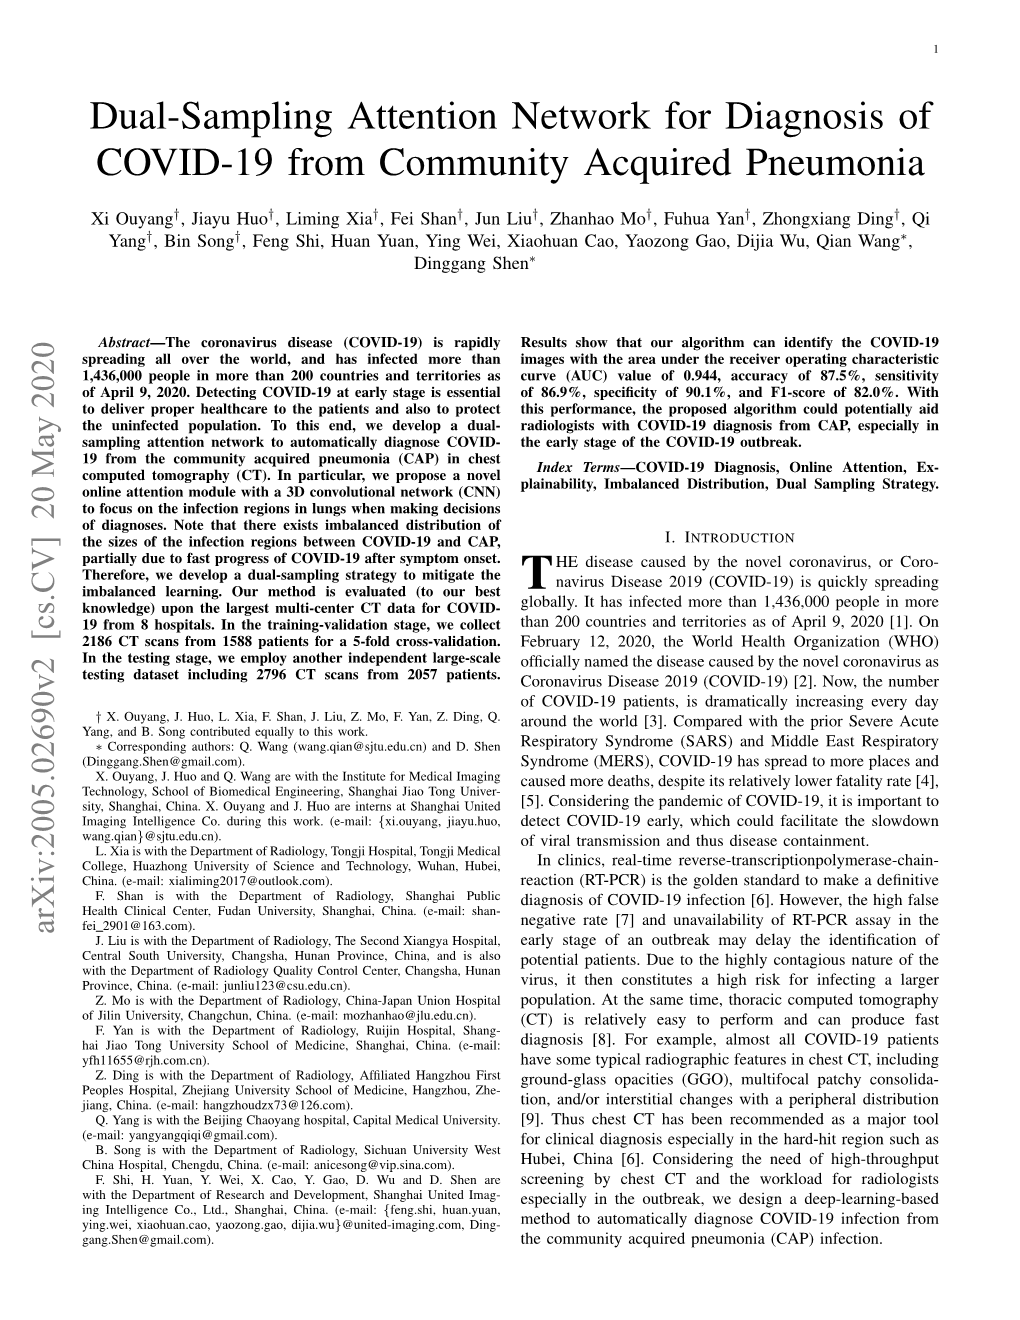 Dual-Sampling Attention Network for Diagnosis of COVID-19 from Community Acquired Pneumonia